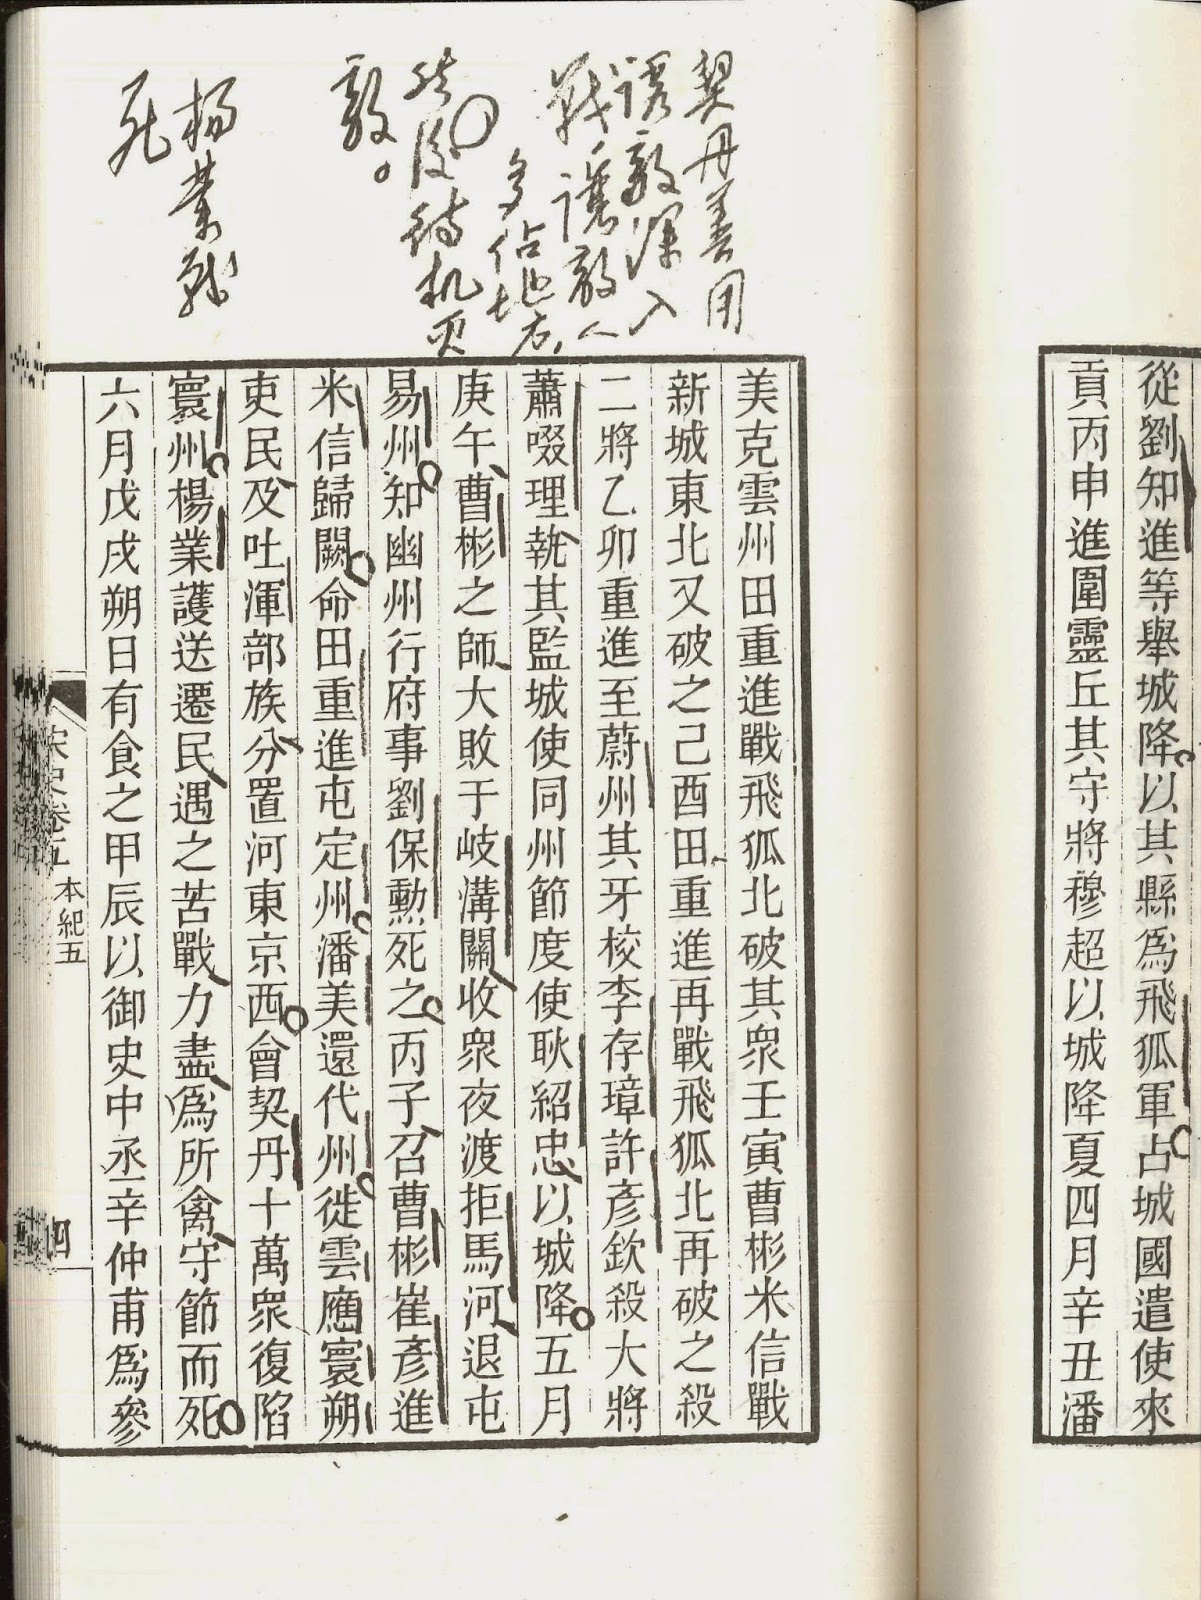 A book of printed characters with some handwritten notes.